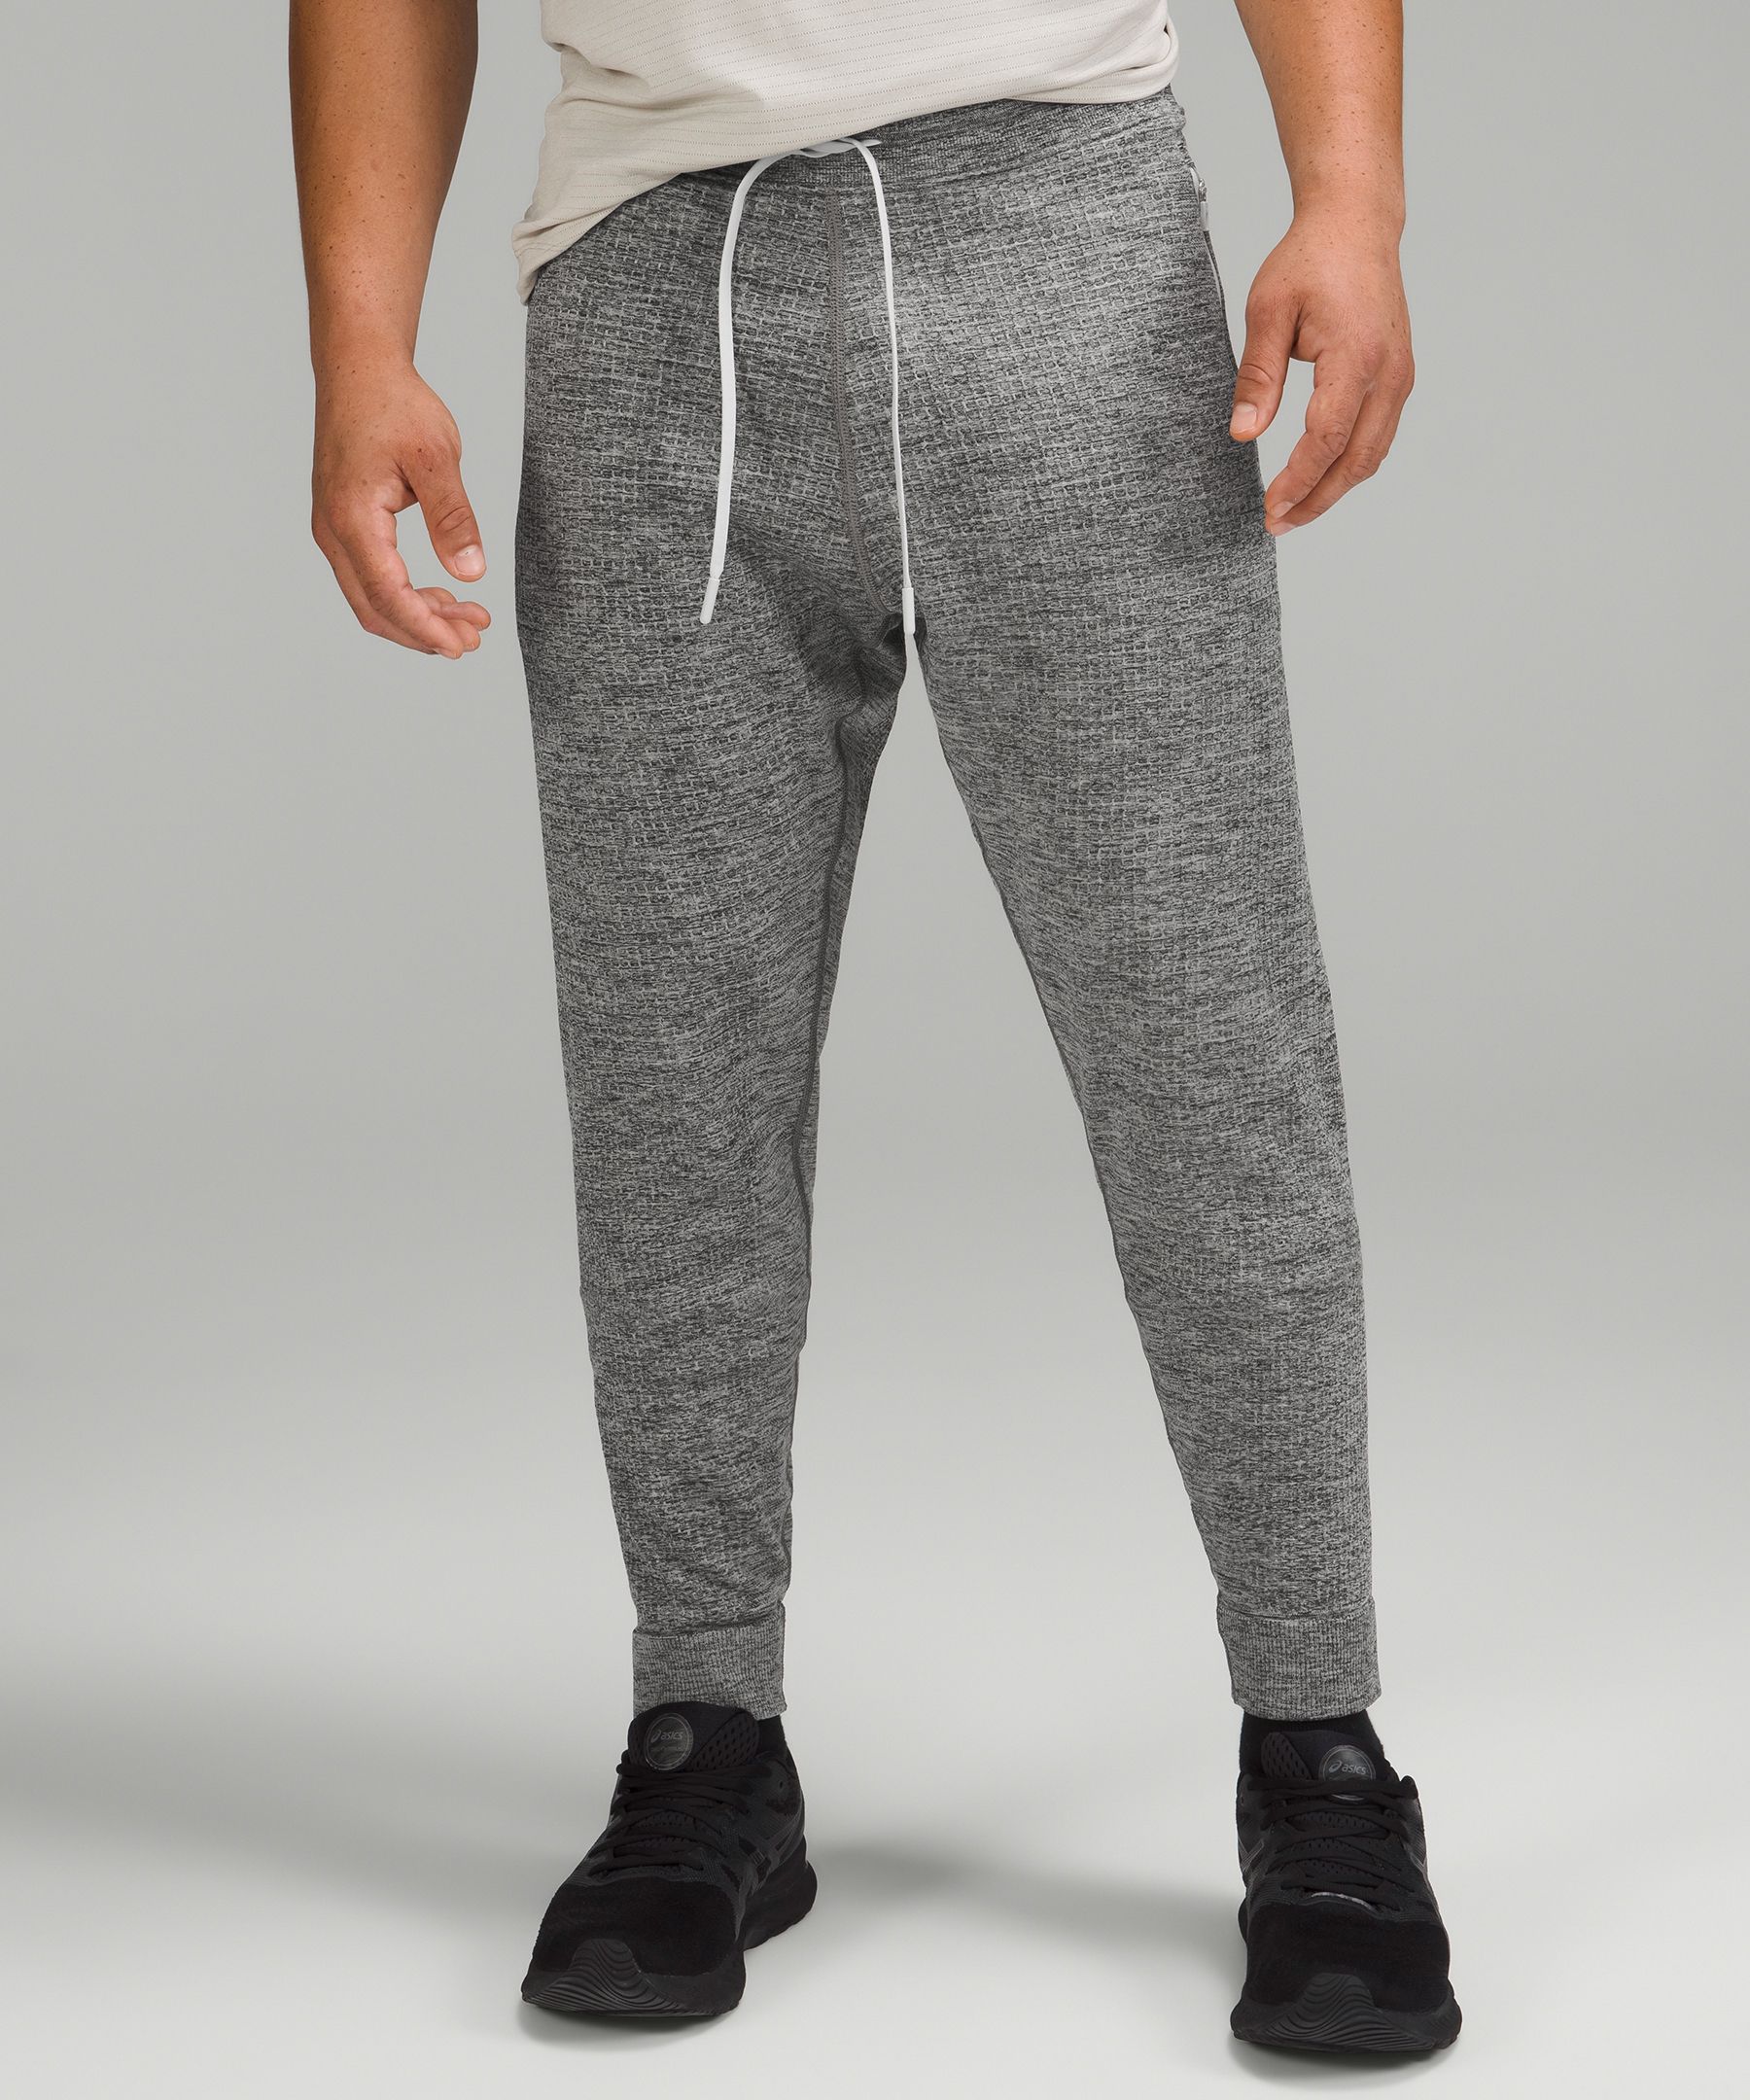 Engineered Warmth Jogger - Graphite Grey/White. Review in comment